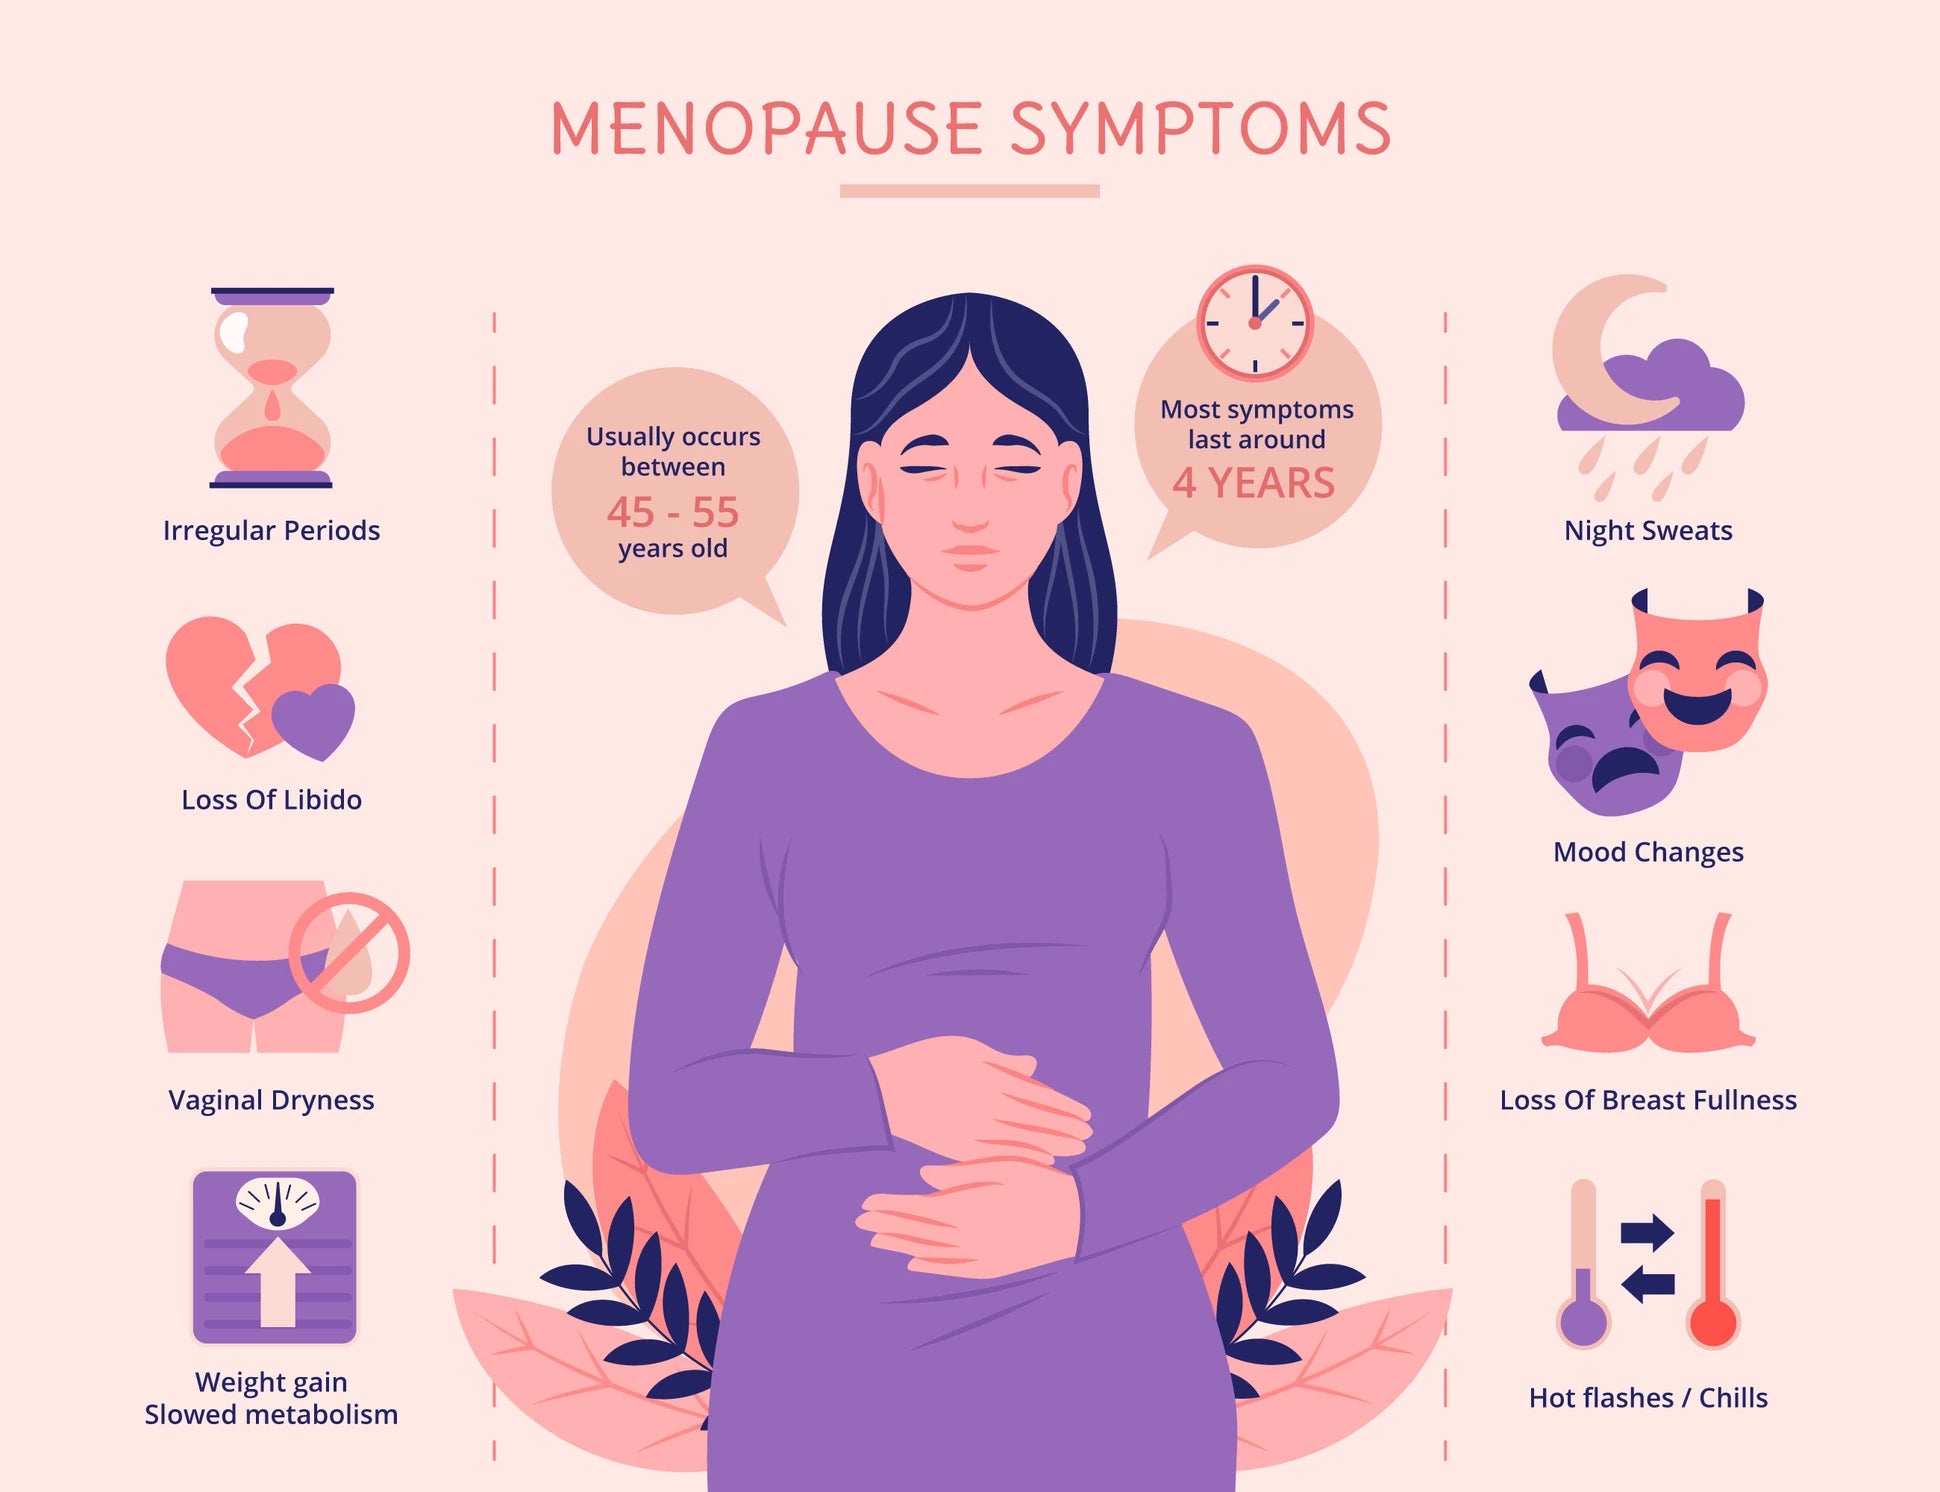 How Do I Know? What Are the Signs and Symptoms of Menopause?